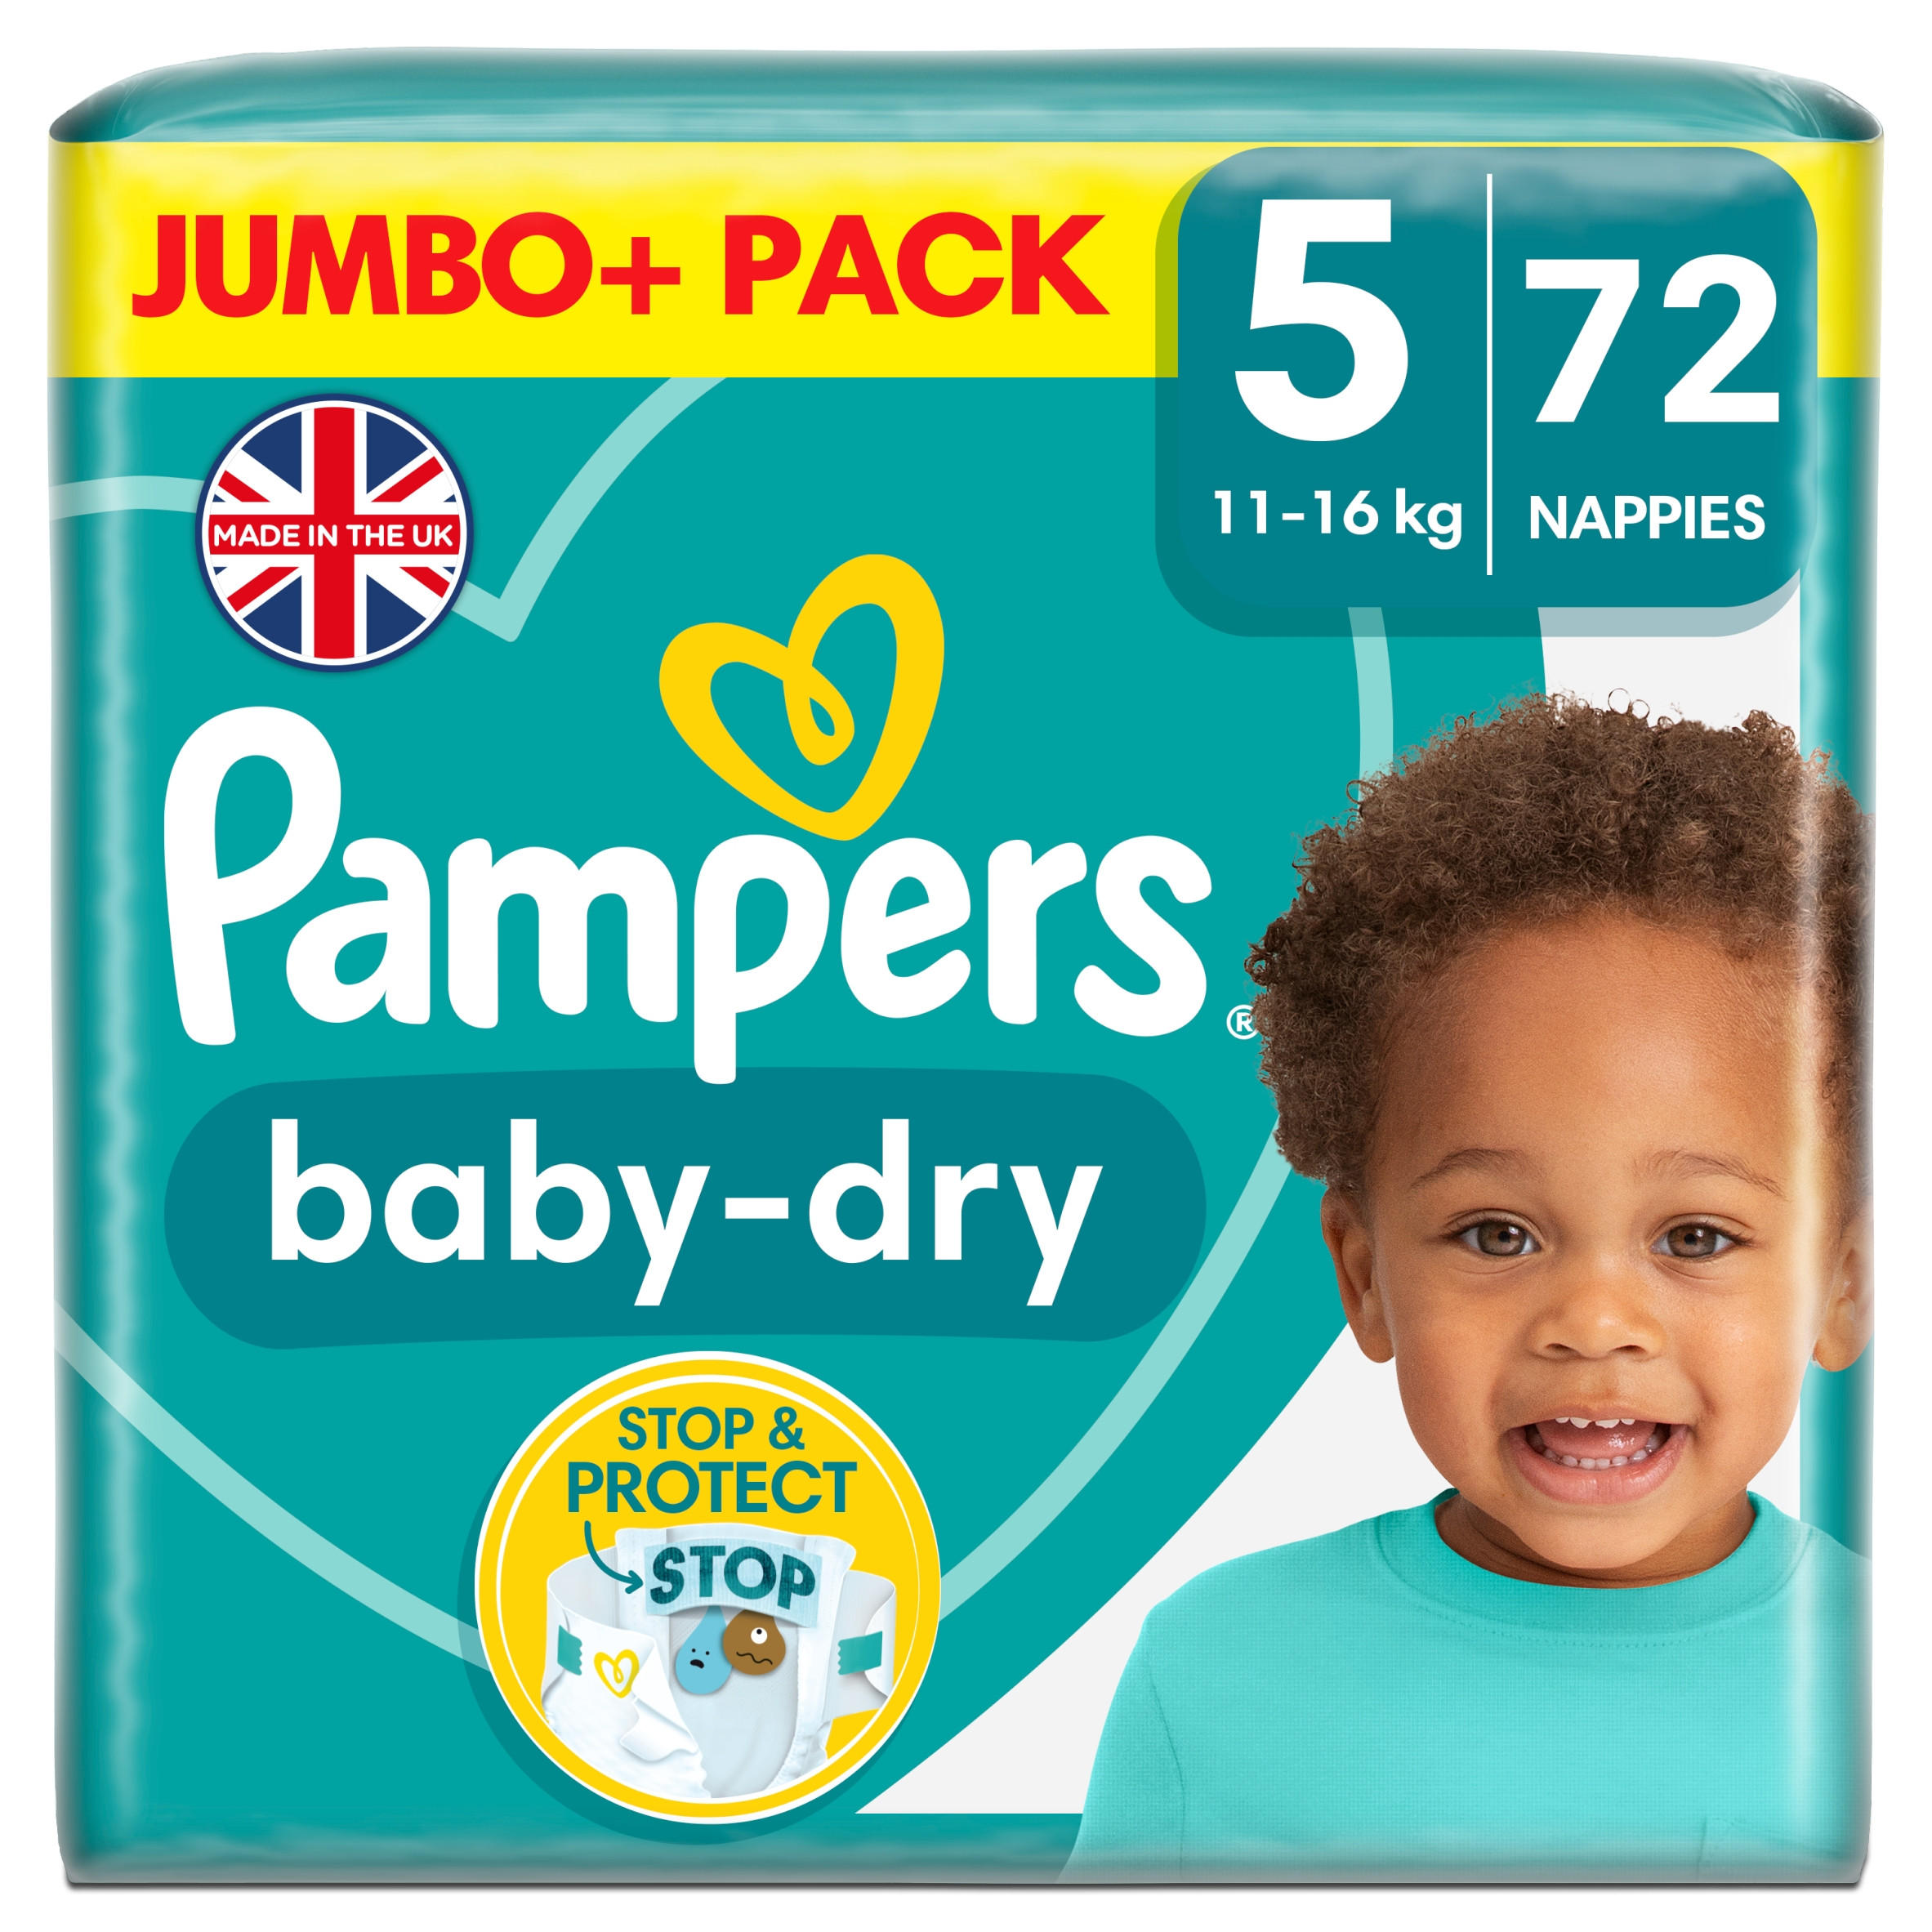 Pampers Baby-Dry Size 5, 72 Nappies, Baby & Toddler